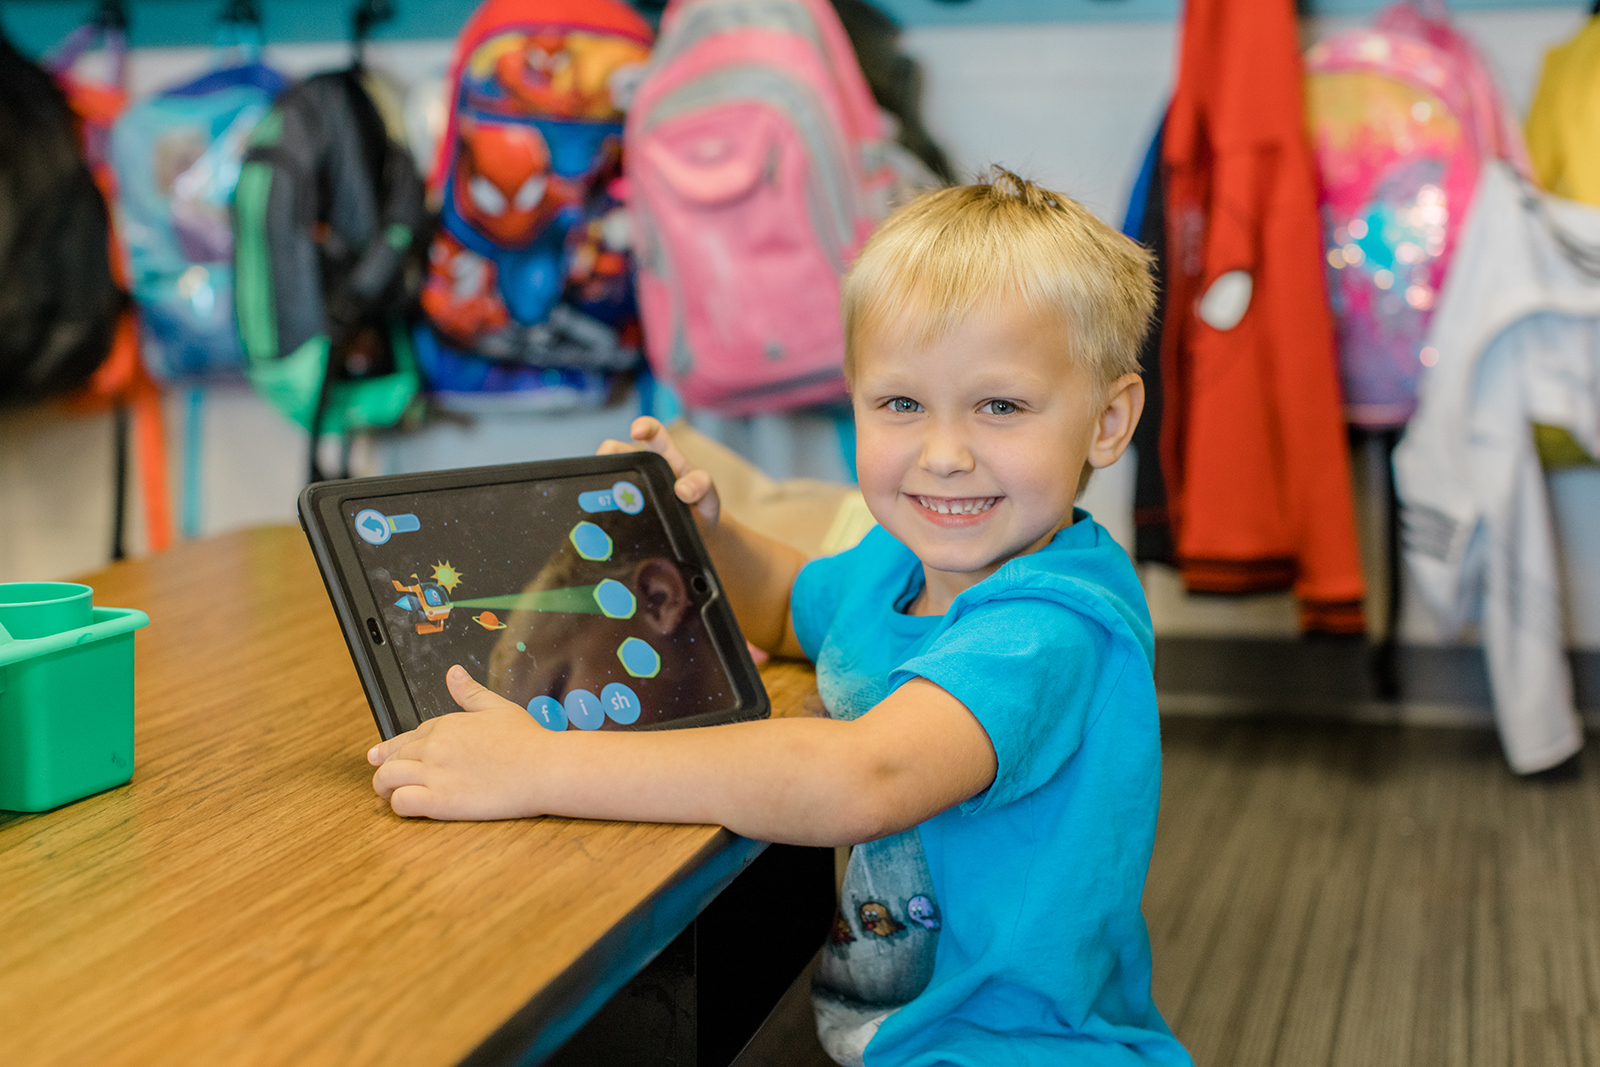 Preschool student smiles and holds up an ipad